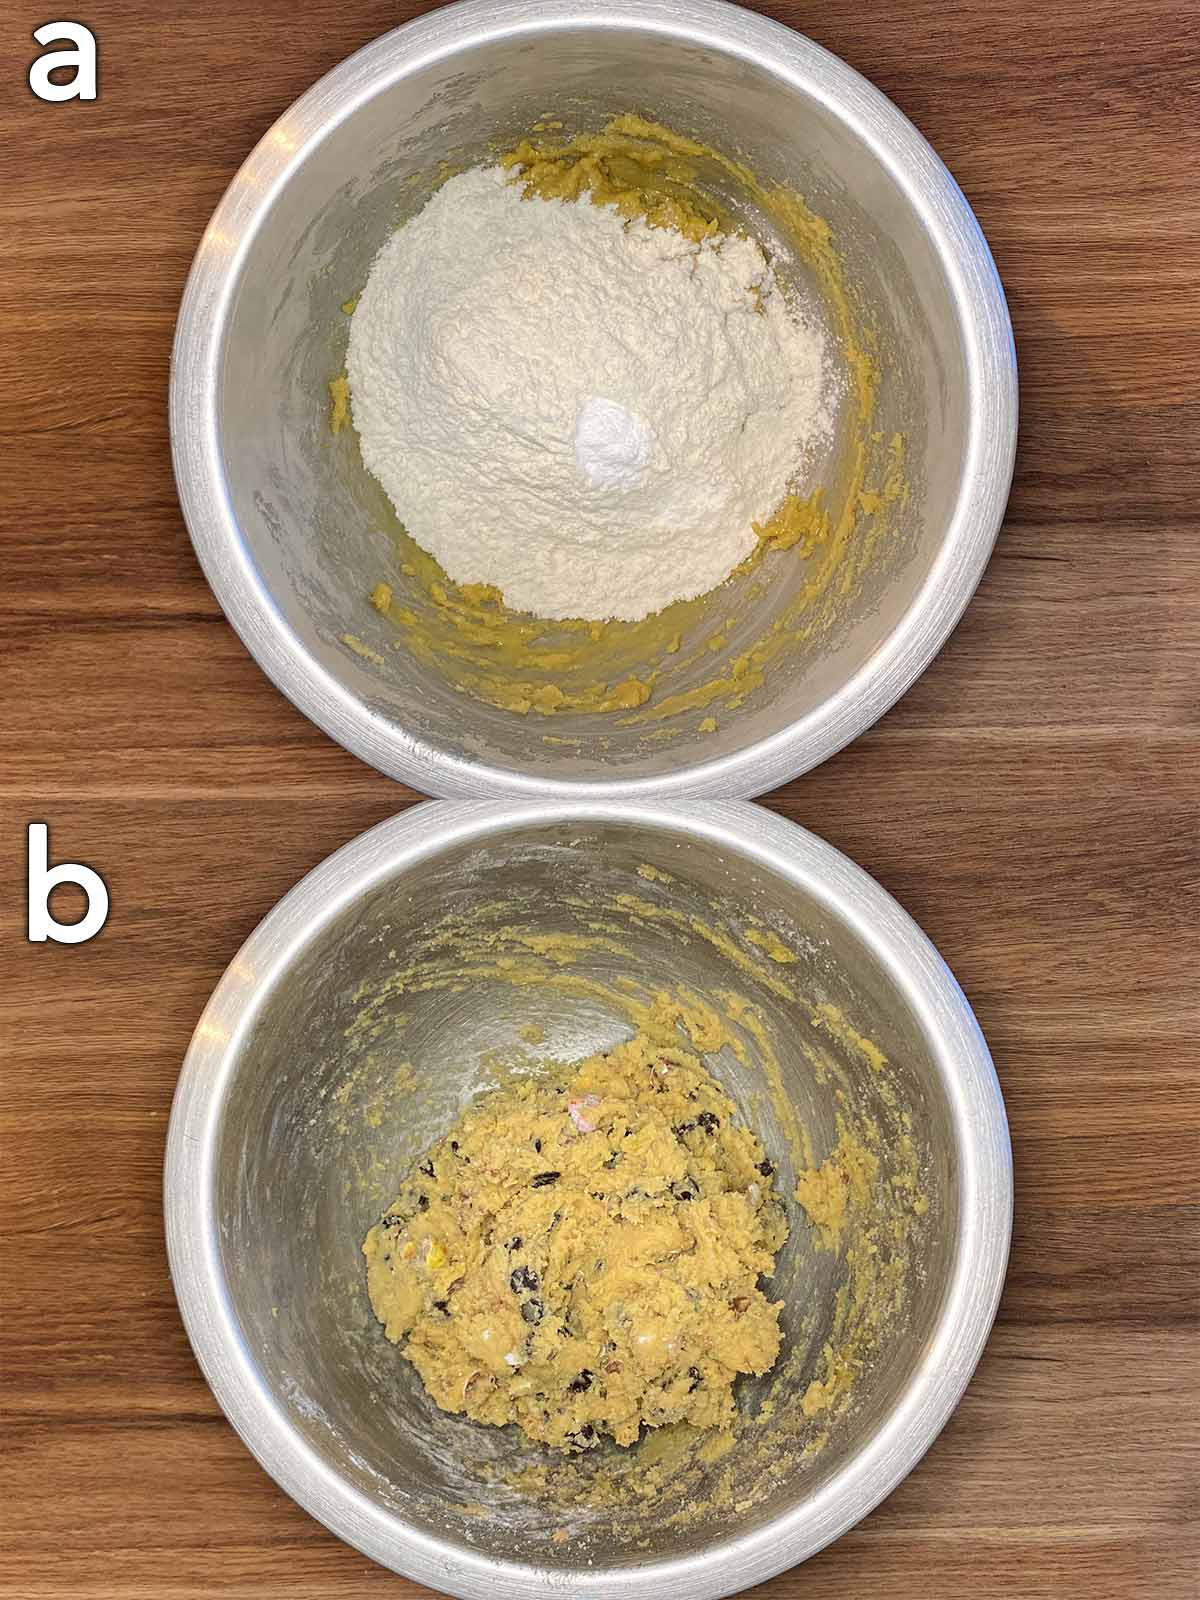 Flour and baking powder added to the bowl, then all mixed together.